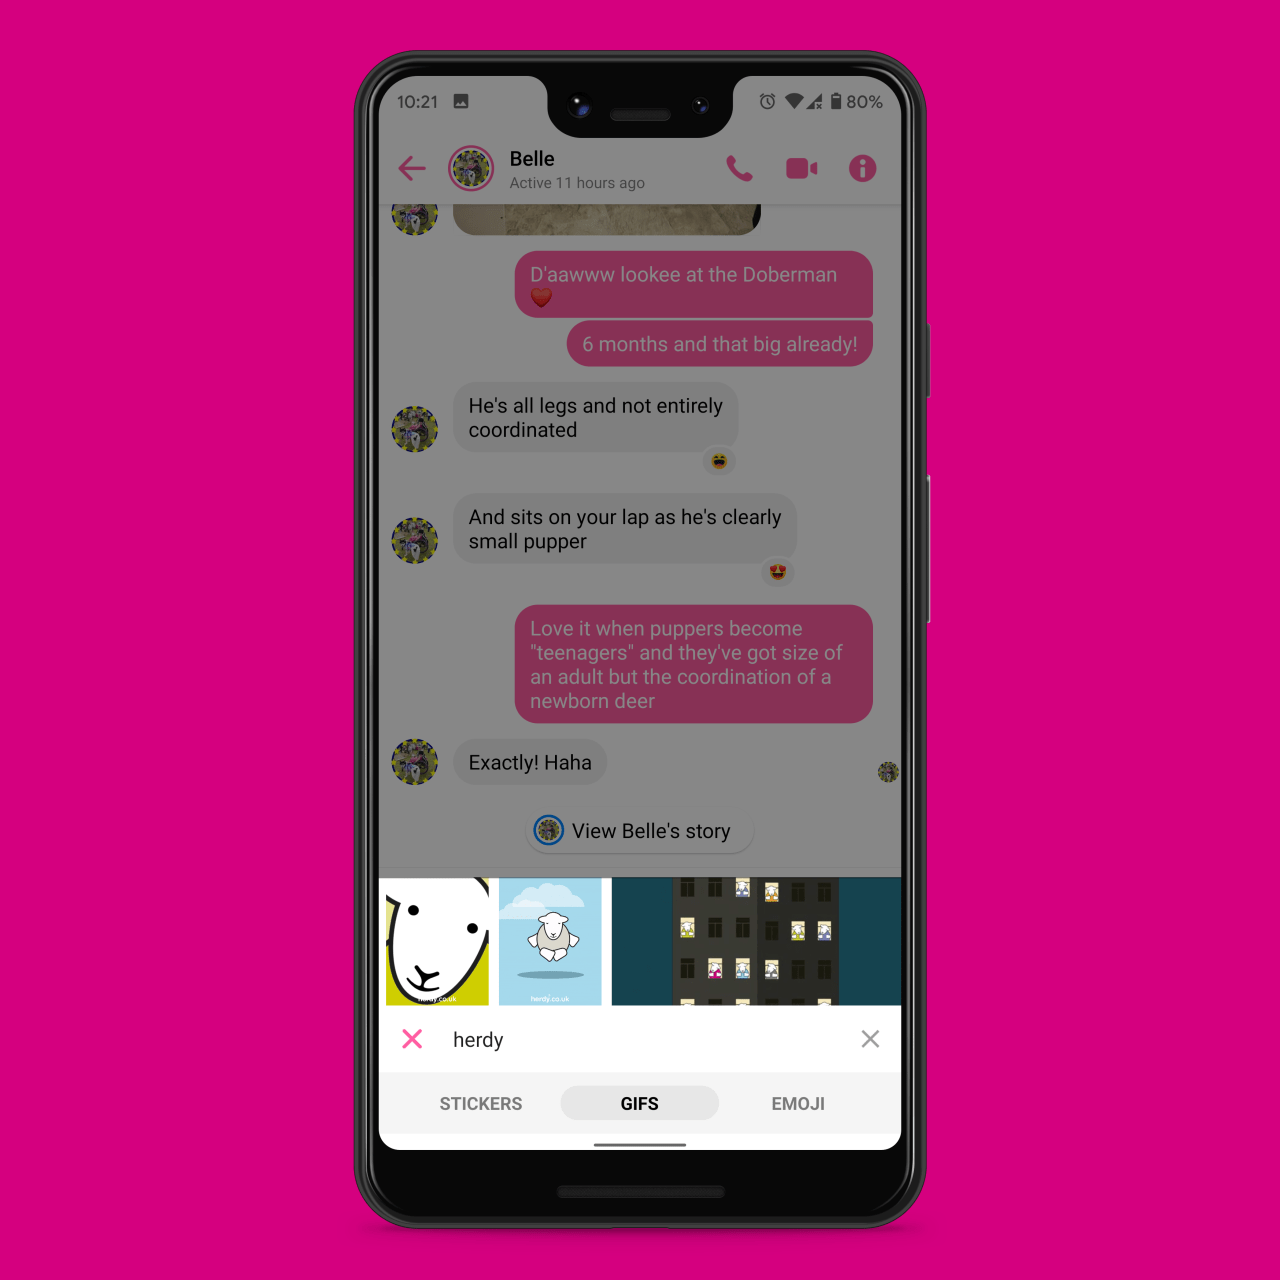 How To Share Herdy GIFs In Whatsapp & Facebook Messenger - The Herdy Company